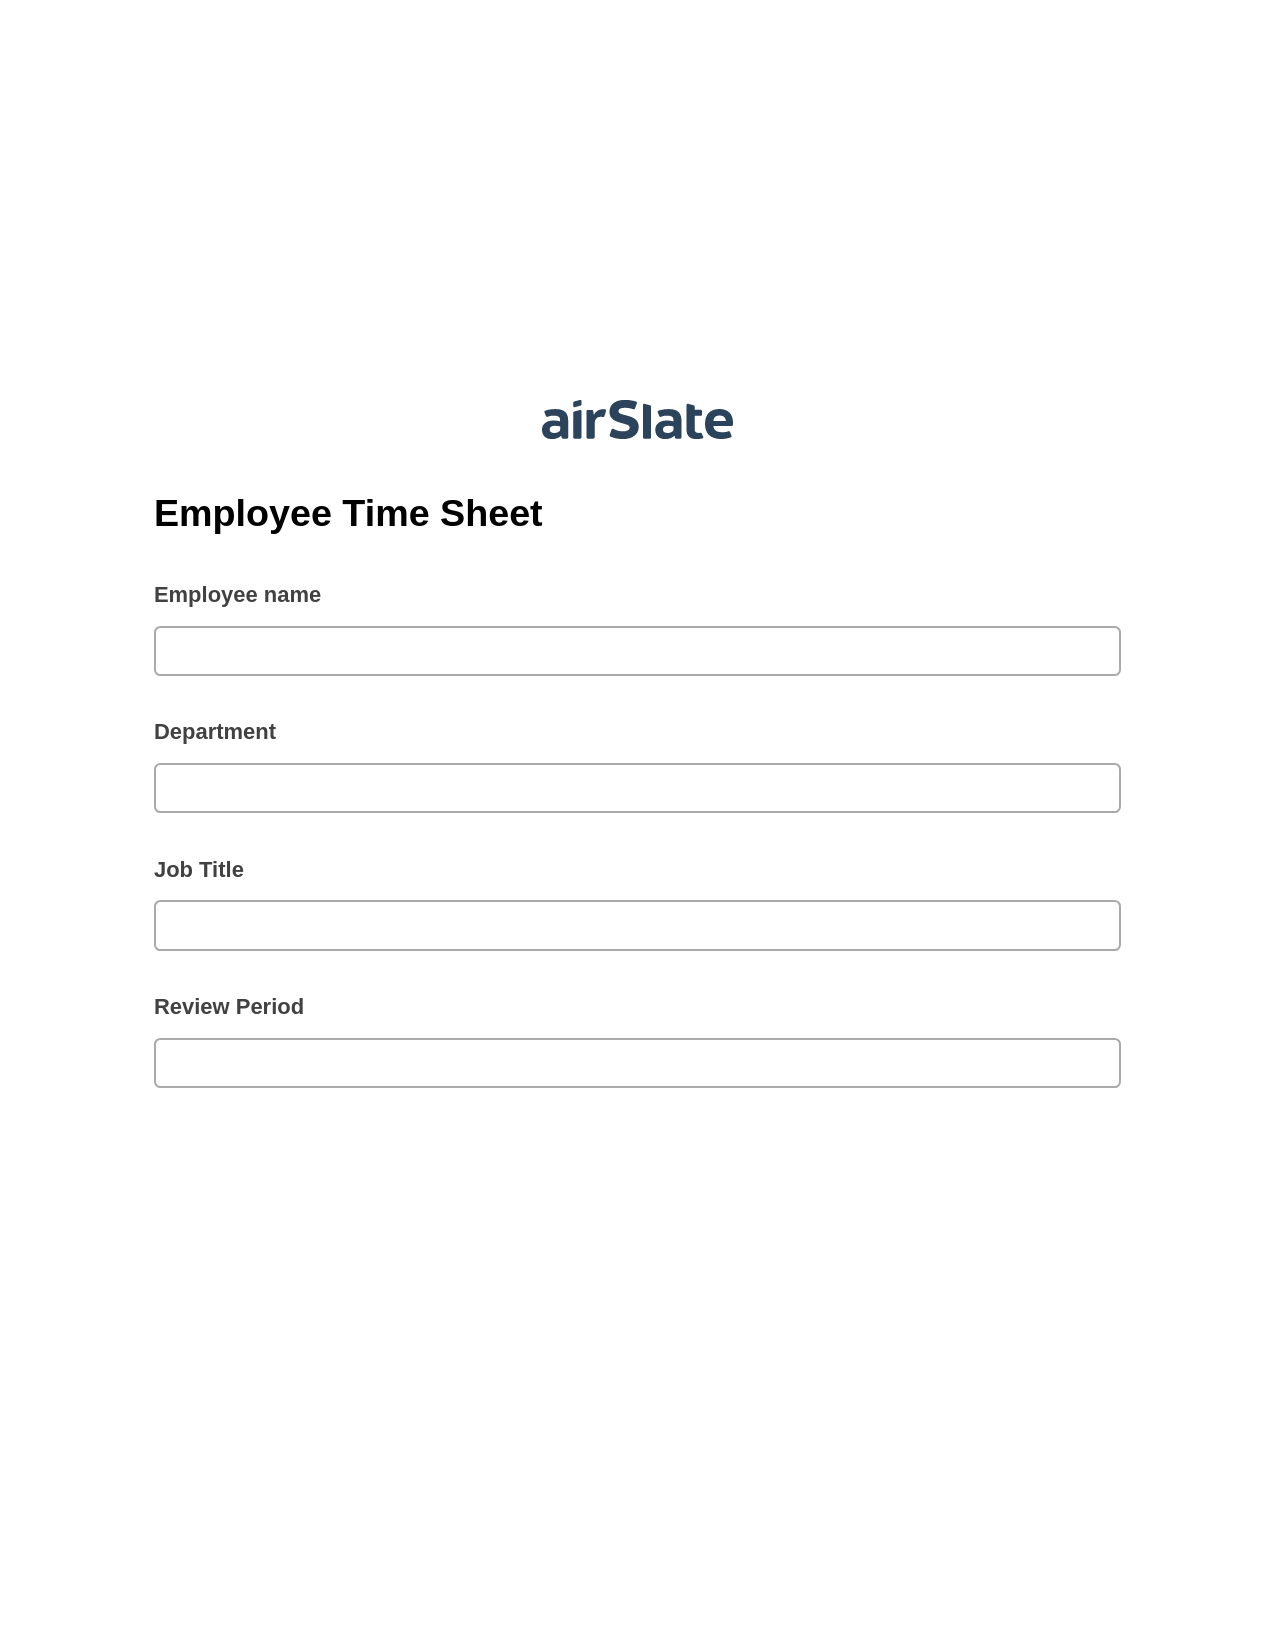 Employee Time Sheet Pre-fill from Excel Spreadsheet Bot, Create slate addon, Archive to Dropbox Bot